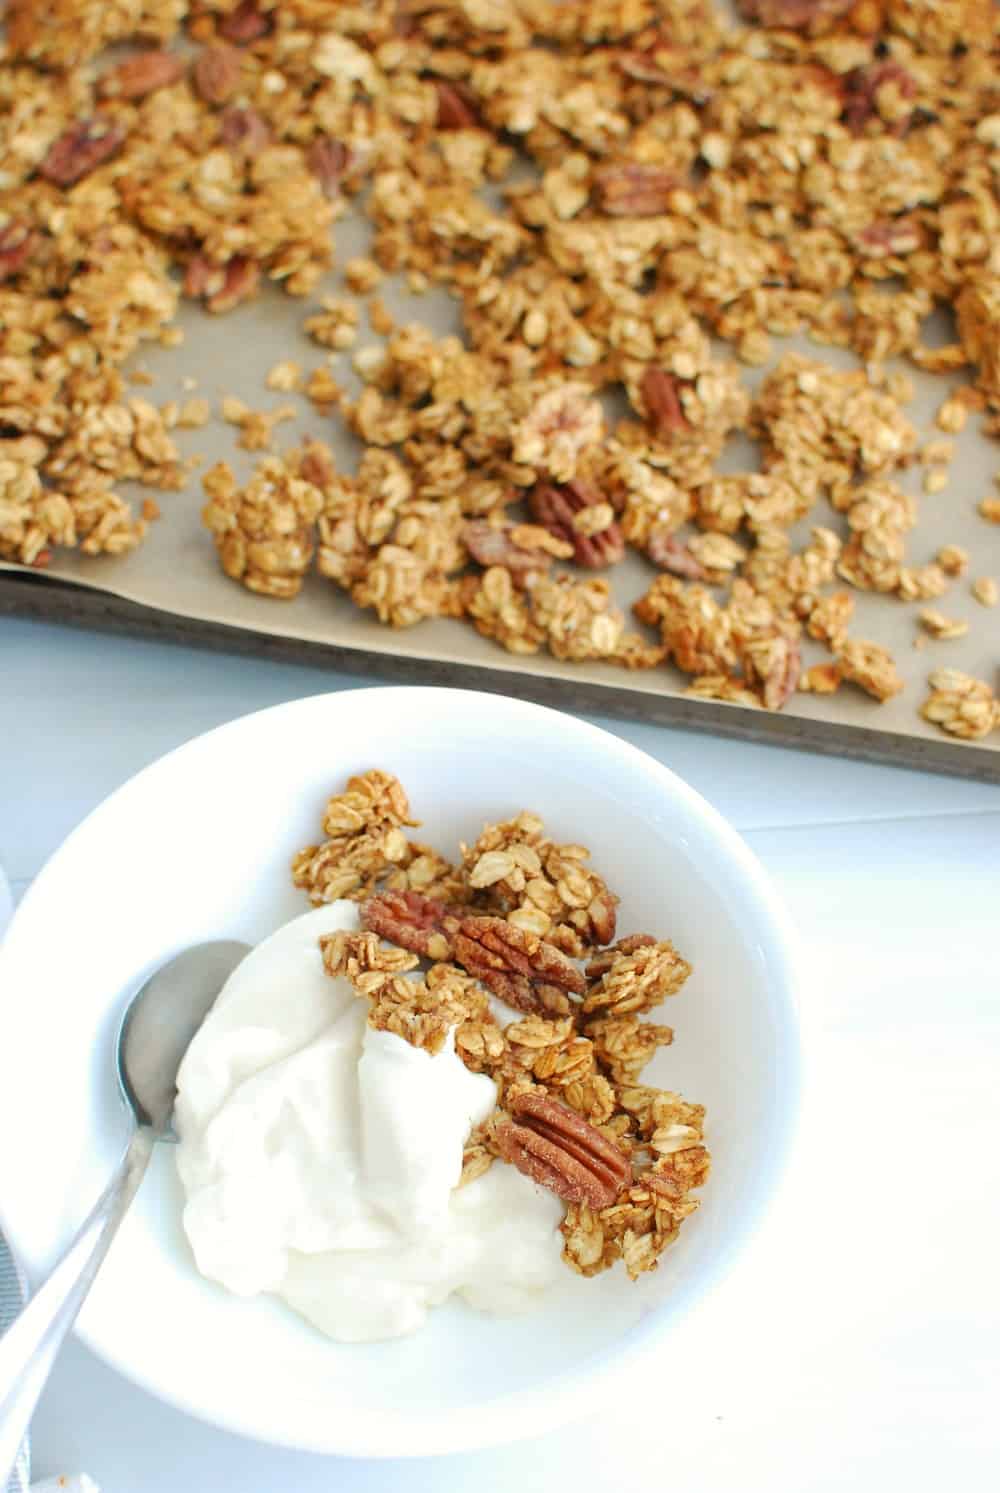 a bowl of yogurt with peanut butter banana granola on top, and the baking sheet of granola next to it